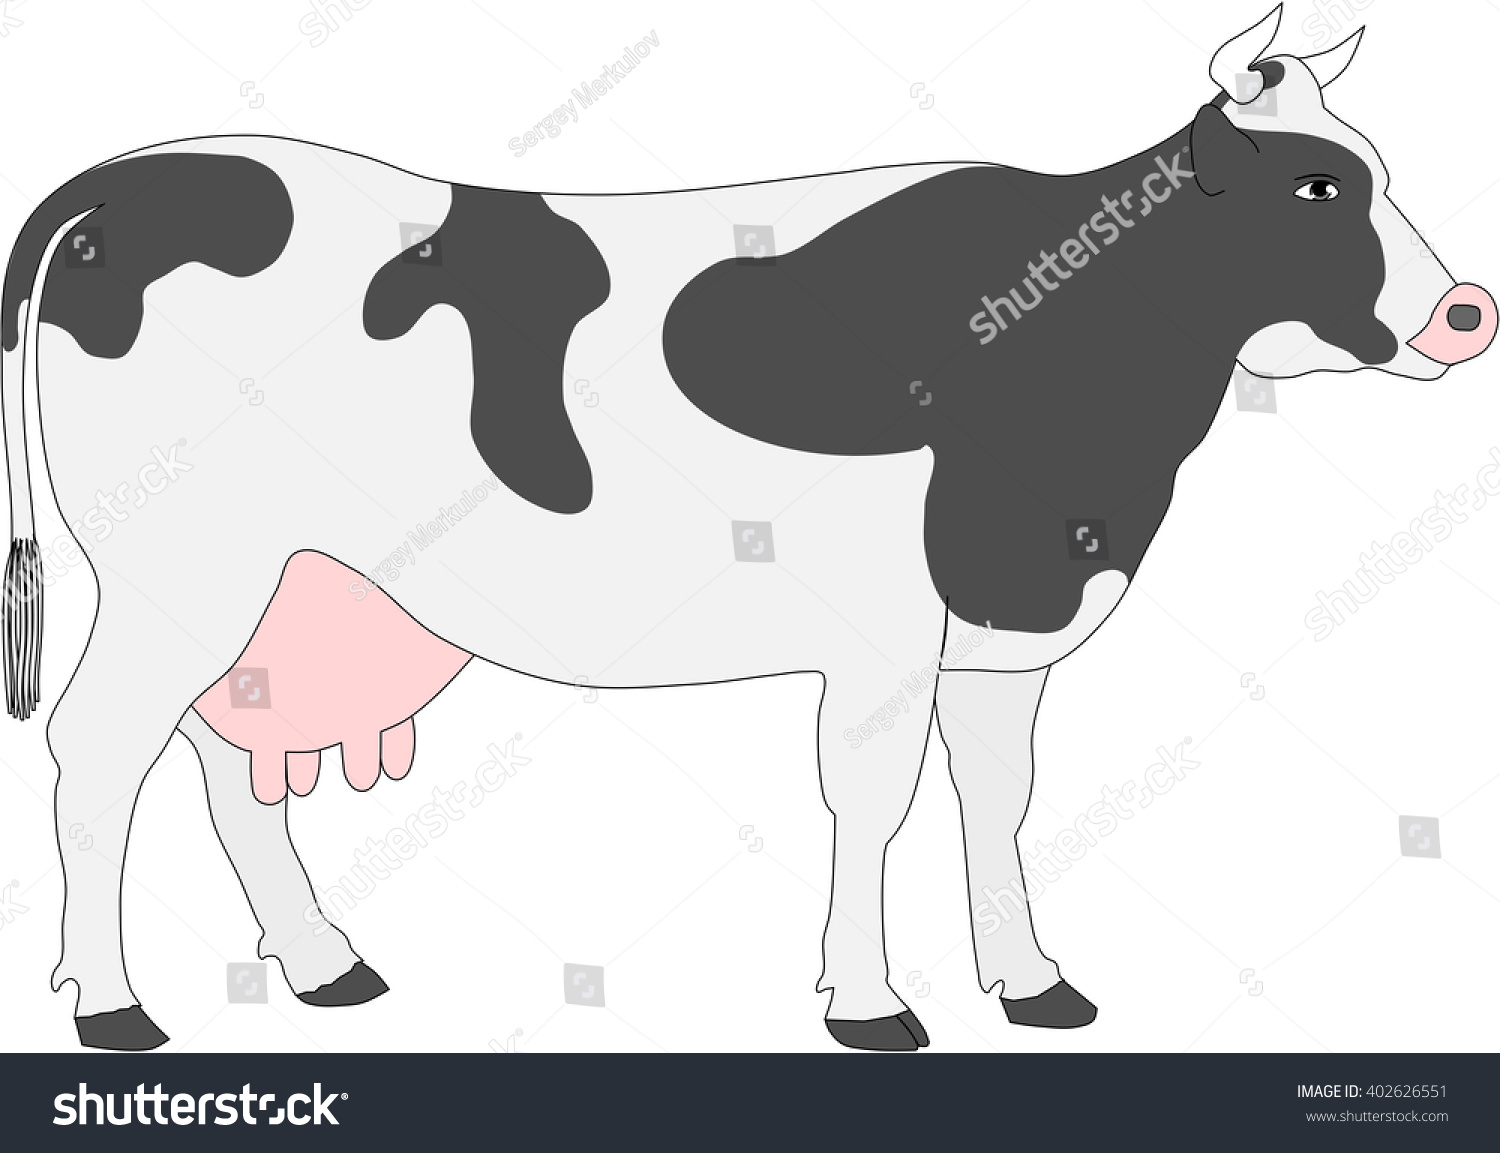 Cow Stock Vector (Royalty Free) 402626551 Shutterstock.